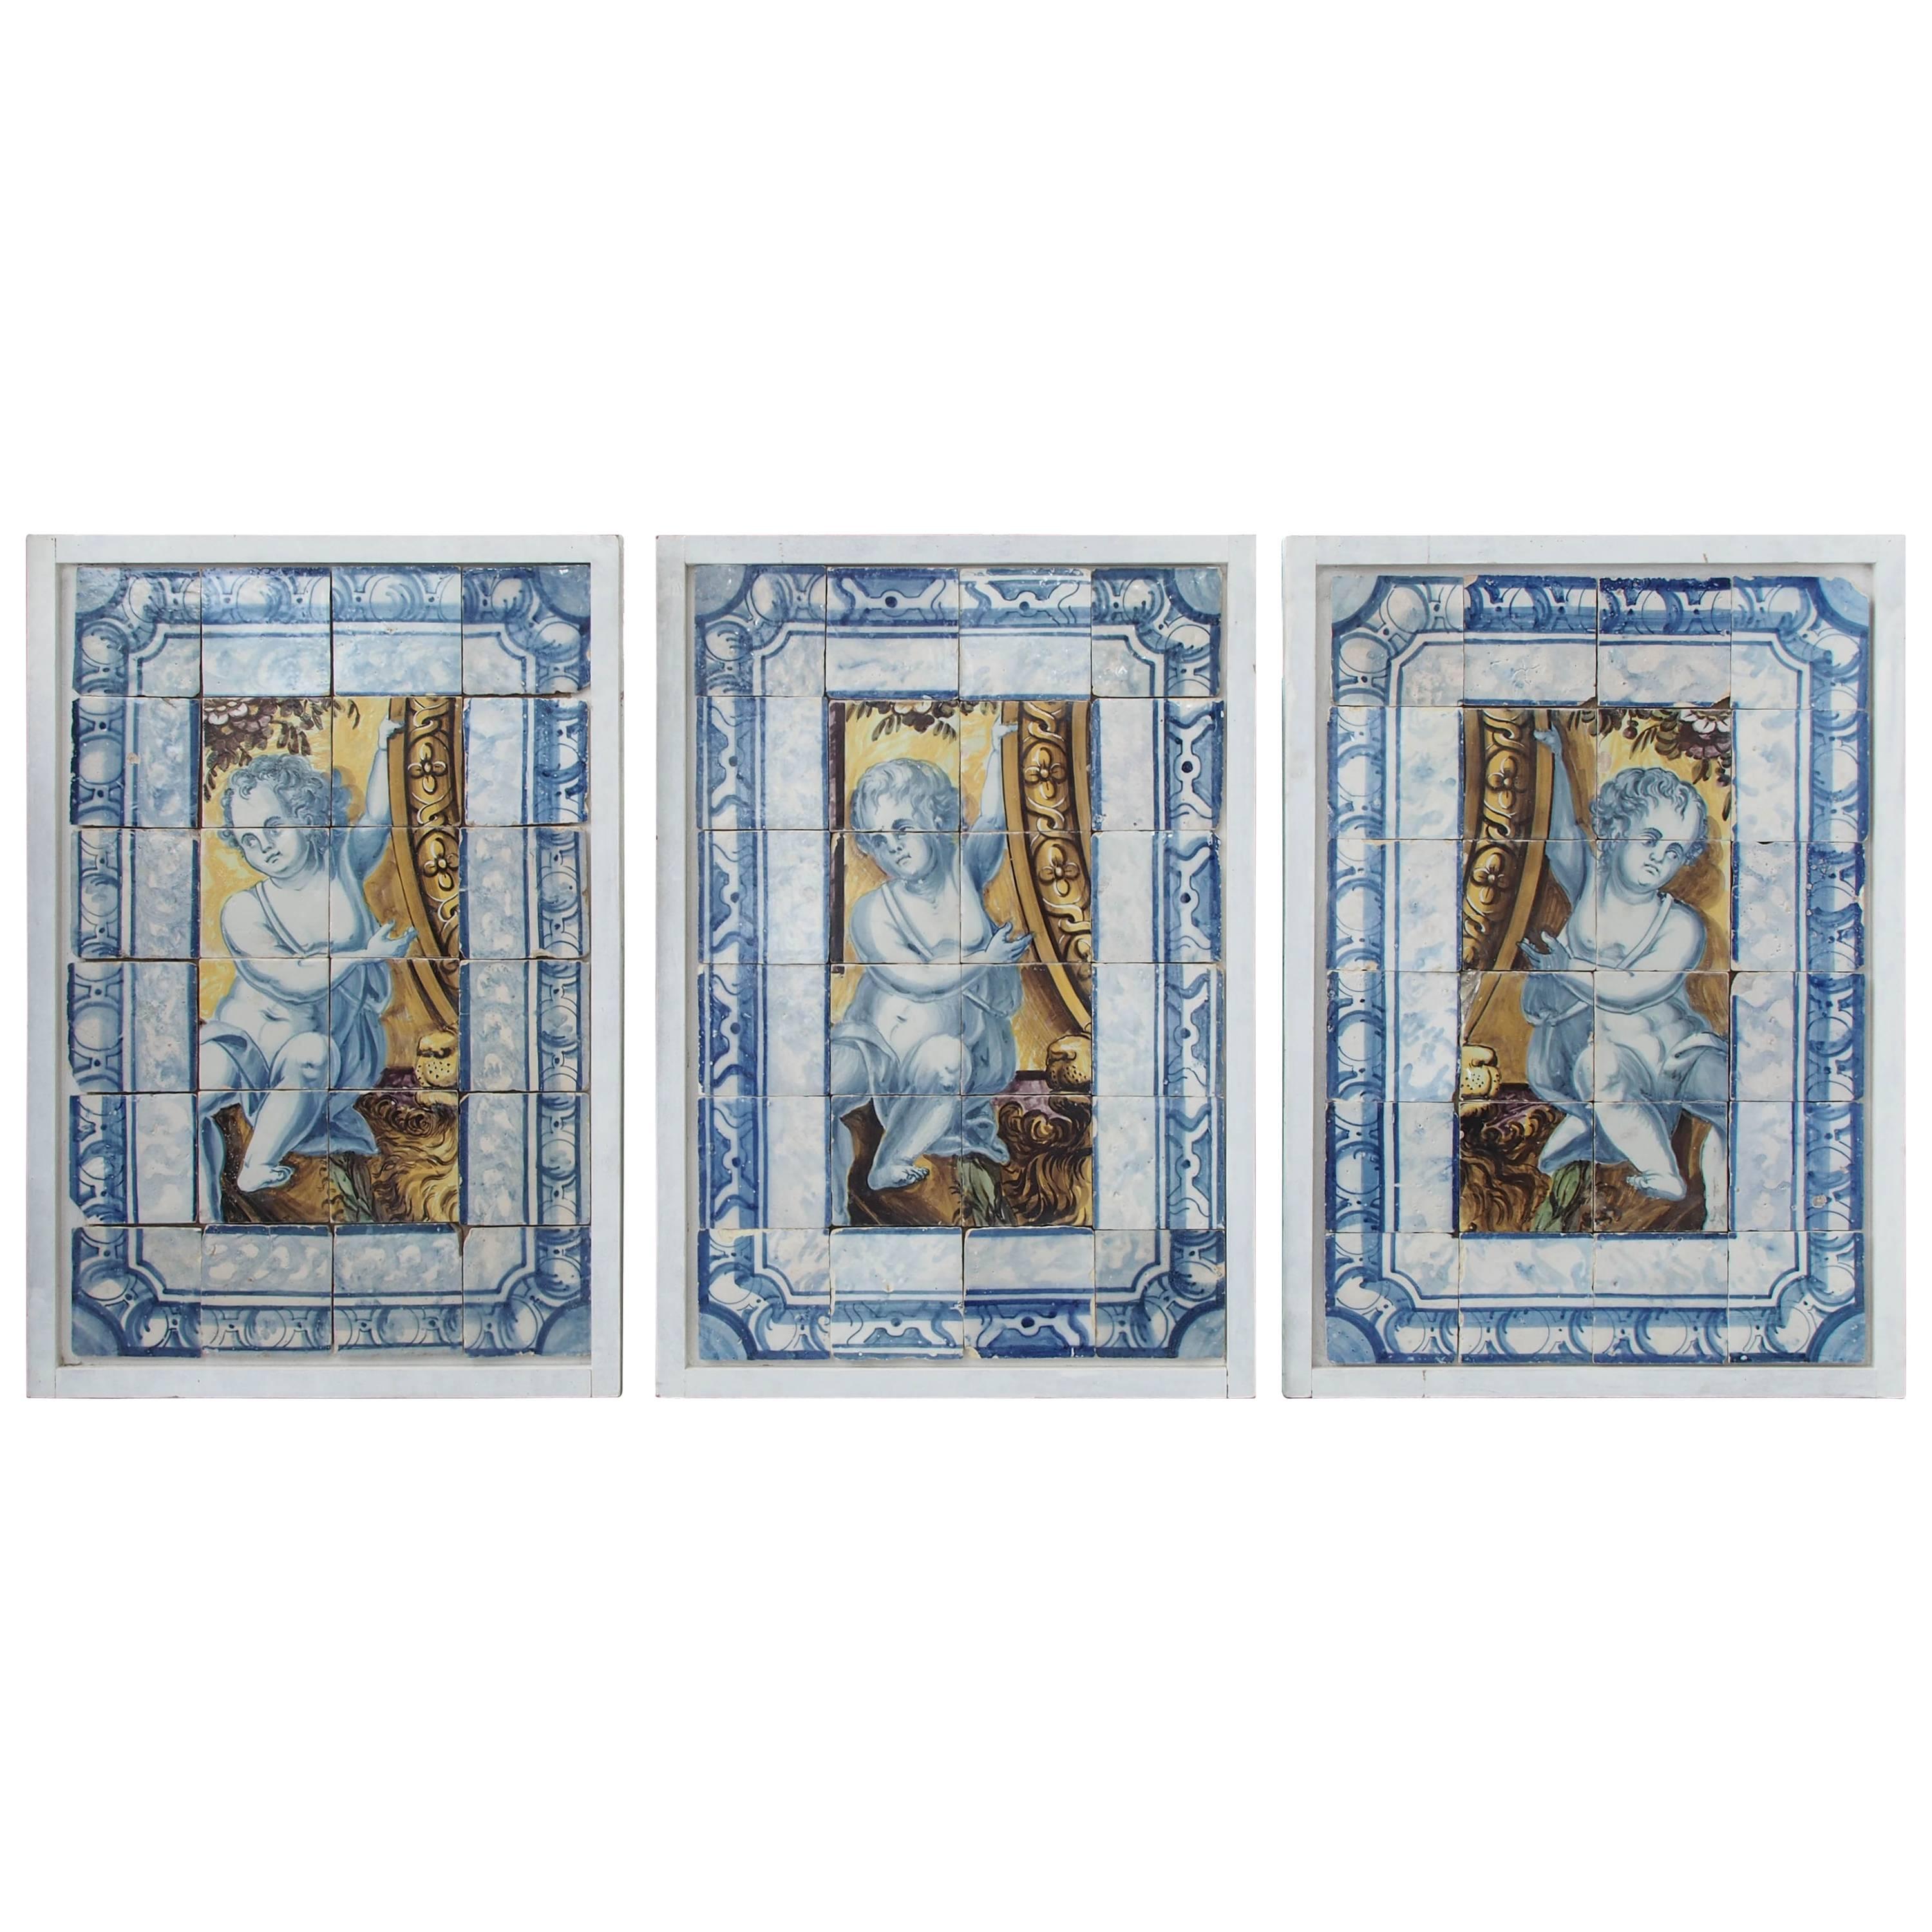 Three 18th Century Portuguese Tile Panels For Sale